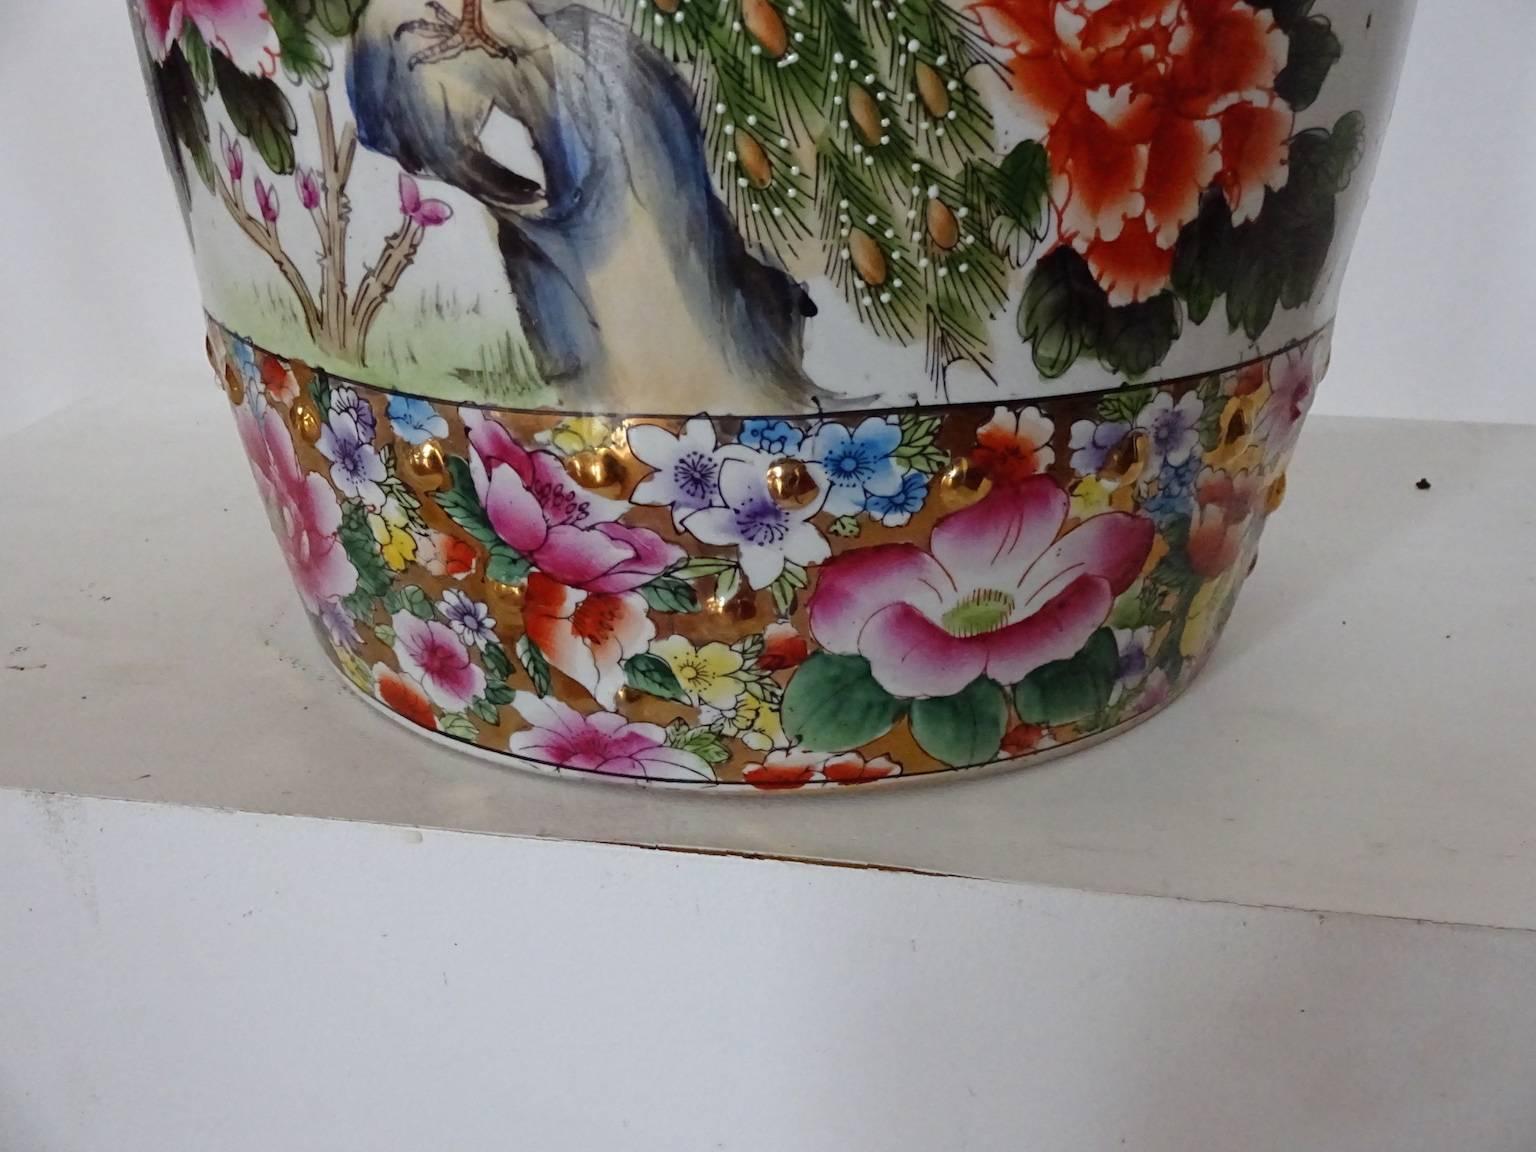 Glazed Colorful Chinese Porcelain Garden Seat with Peacock